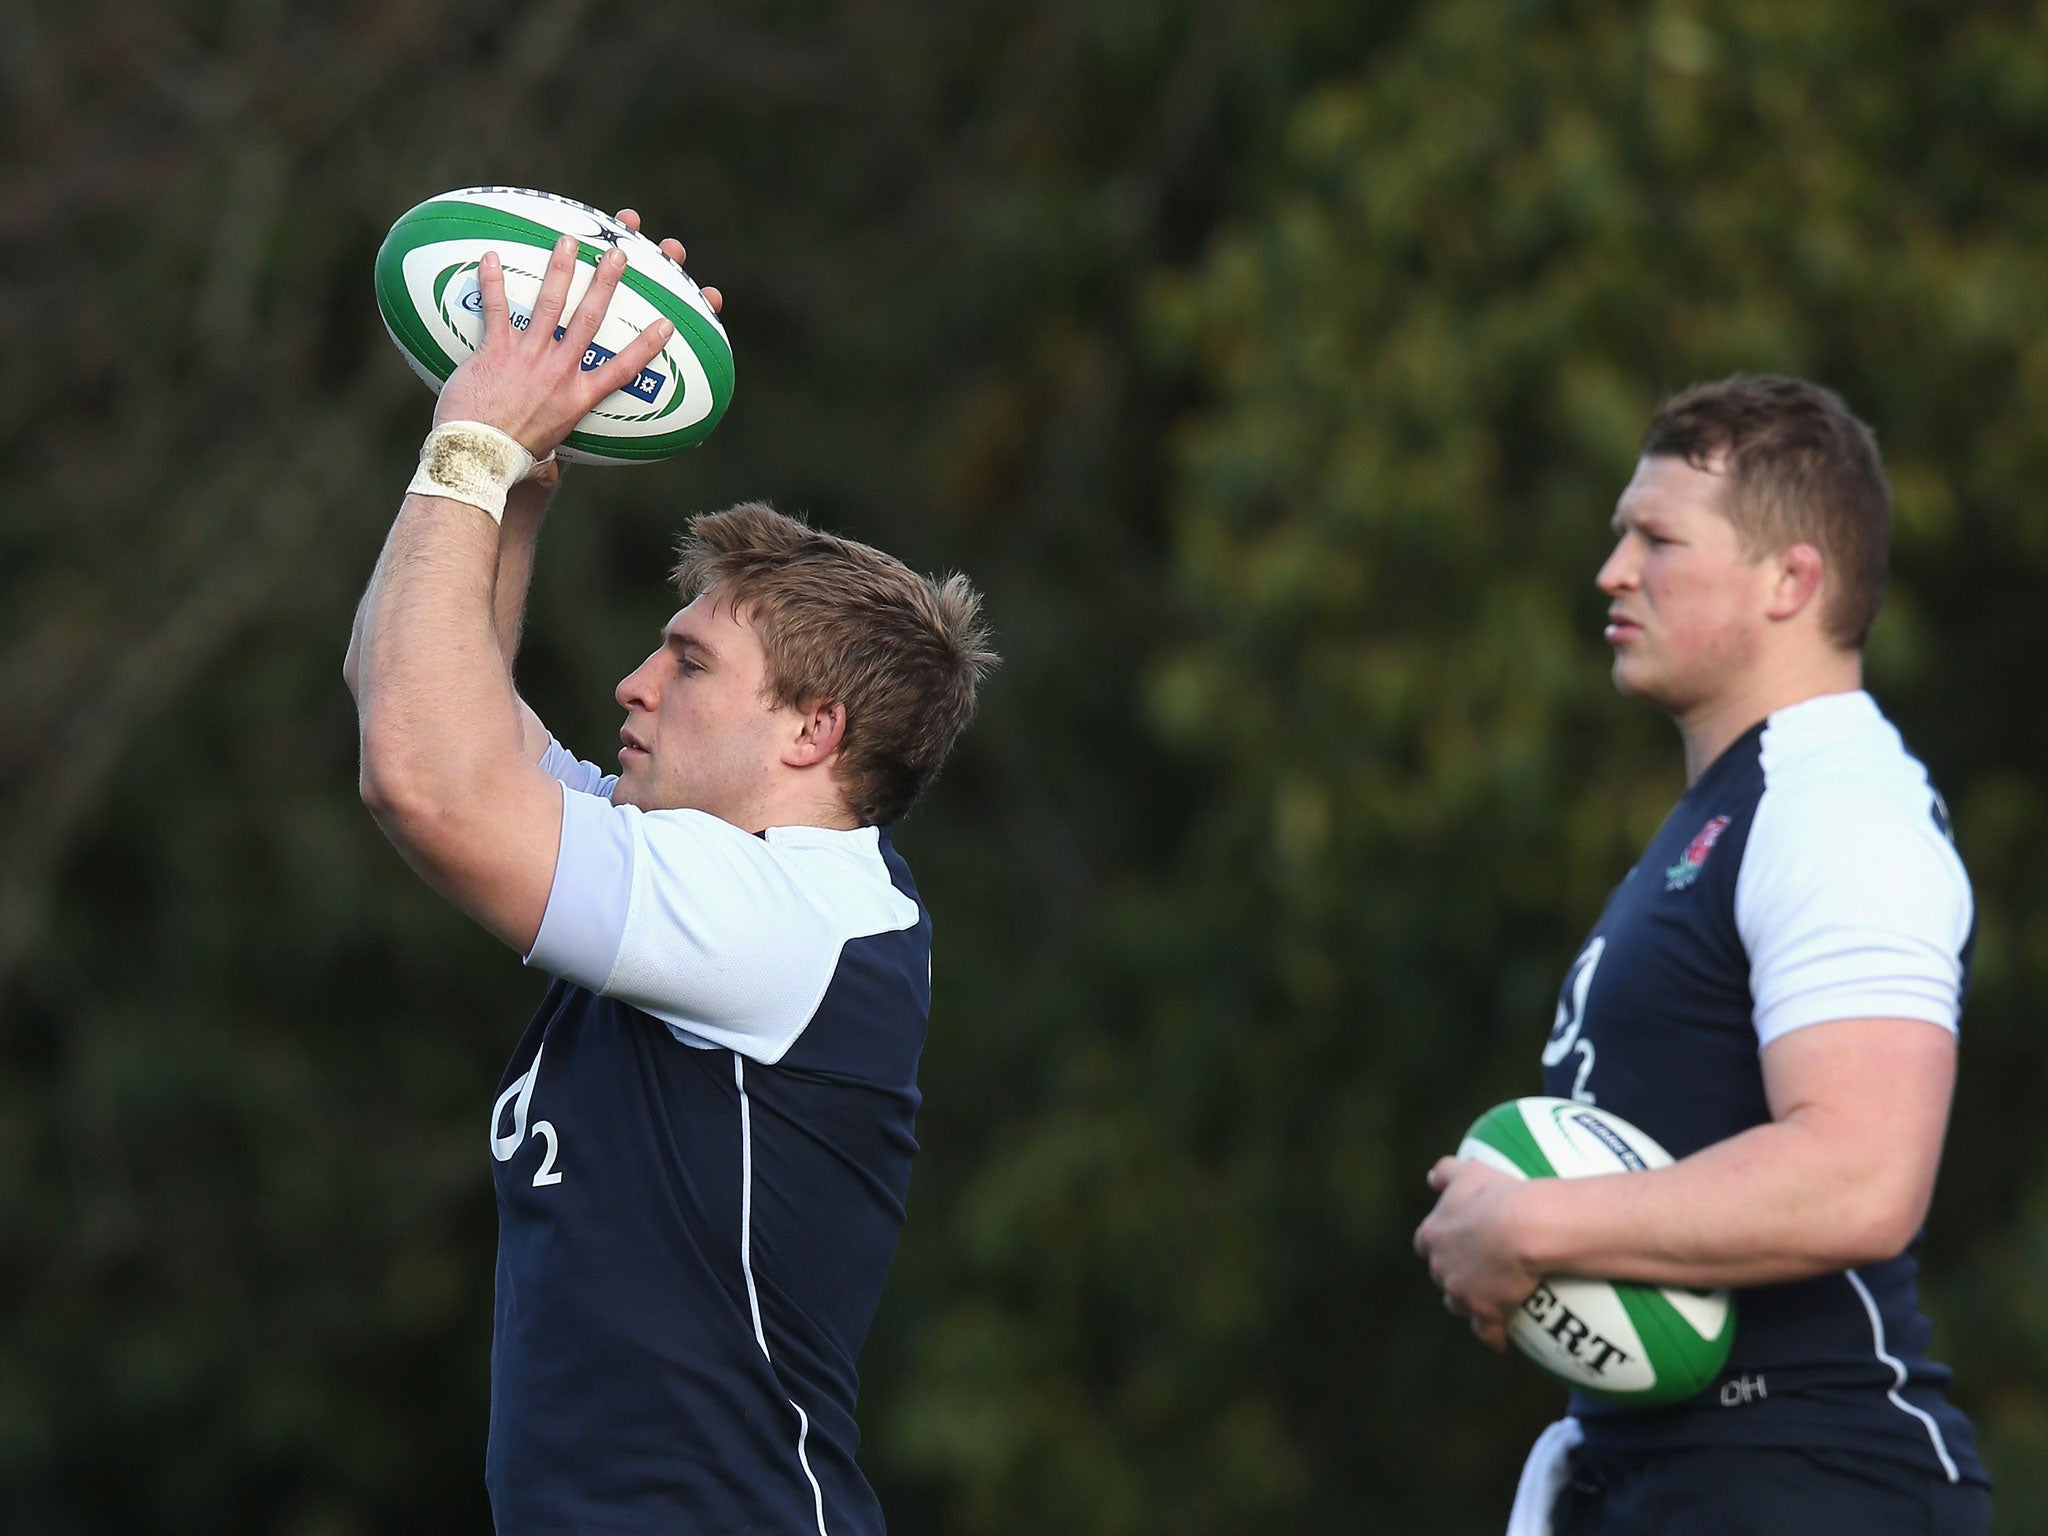 No 2's company: Competing Lions hookers Tom Youngs (left) and Dylan Hartley. 'On the training field you want to get ahead of each other,' says Youngs